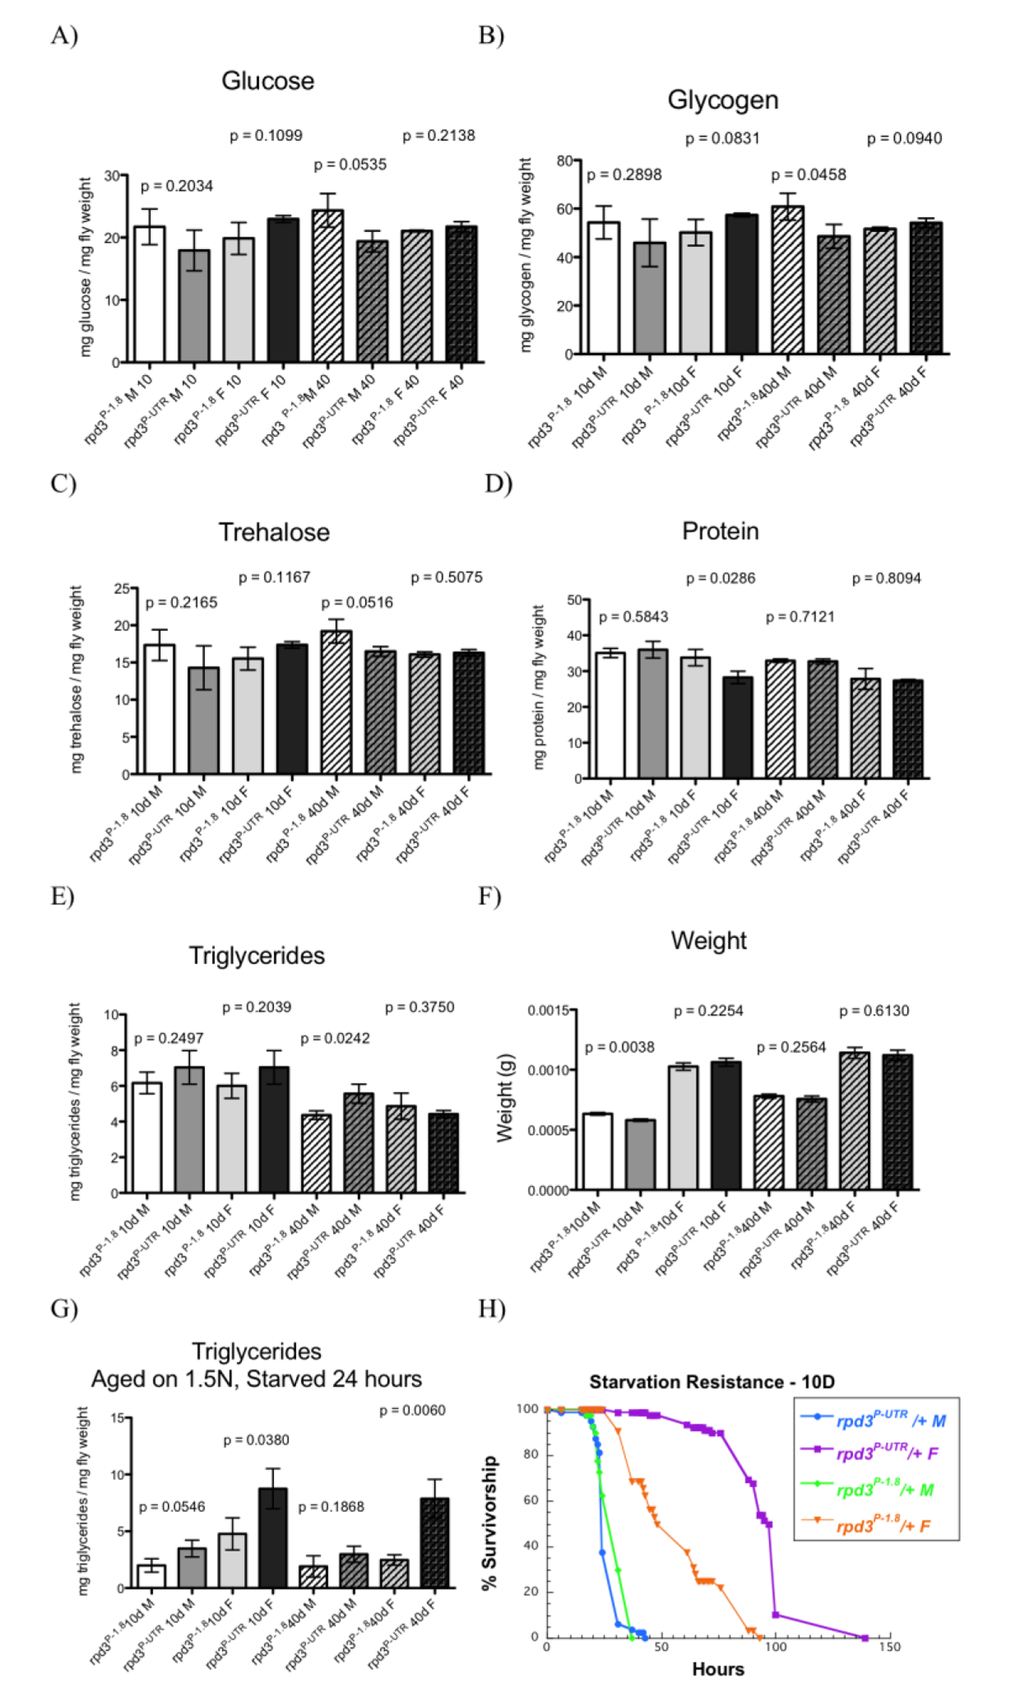 rpd3 reduction affects fly intermediary metabolism. (A-E) Total glucose (A), glycogen (B), trehalose (C), protein (D) and triglyceride (E) levels in rpd3P-UTR/+ (experimental) and rpd3P-1.8/+ (control) male and female flies at age 10 and 40 days. F) Weight of male and female flies used in (C-E). (G). Total triglyceride levels in rpd3P-UTR/+ and rpd3P-1.8 /+ flies aged on 1.5N for 10 or 40 days and then starved for 24 hours. Data are presented as means + SD (n=3, 30 flies per replicate. t test) (H) rpd3 reduction increases stress resistance in flies. Survival curves of rpd3P-UTR/+ and rpd3P-1.8/+ male and female flies during starvation at 10 of age.